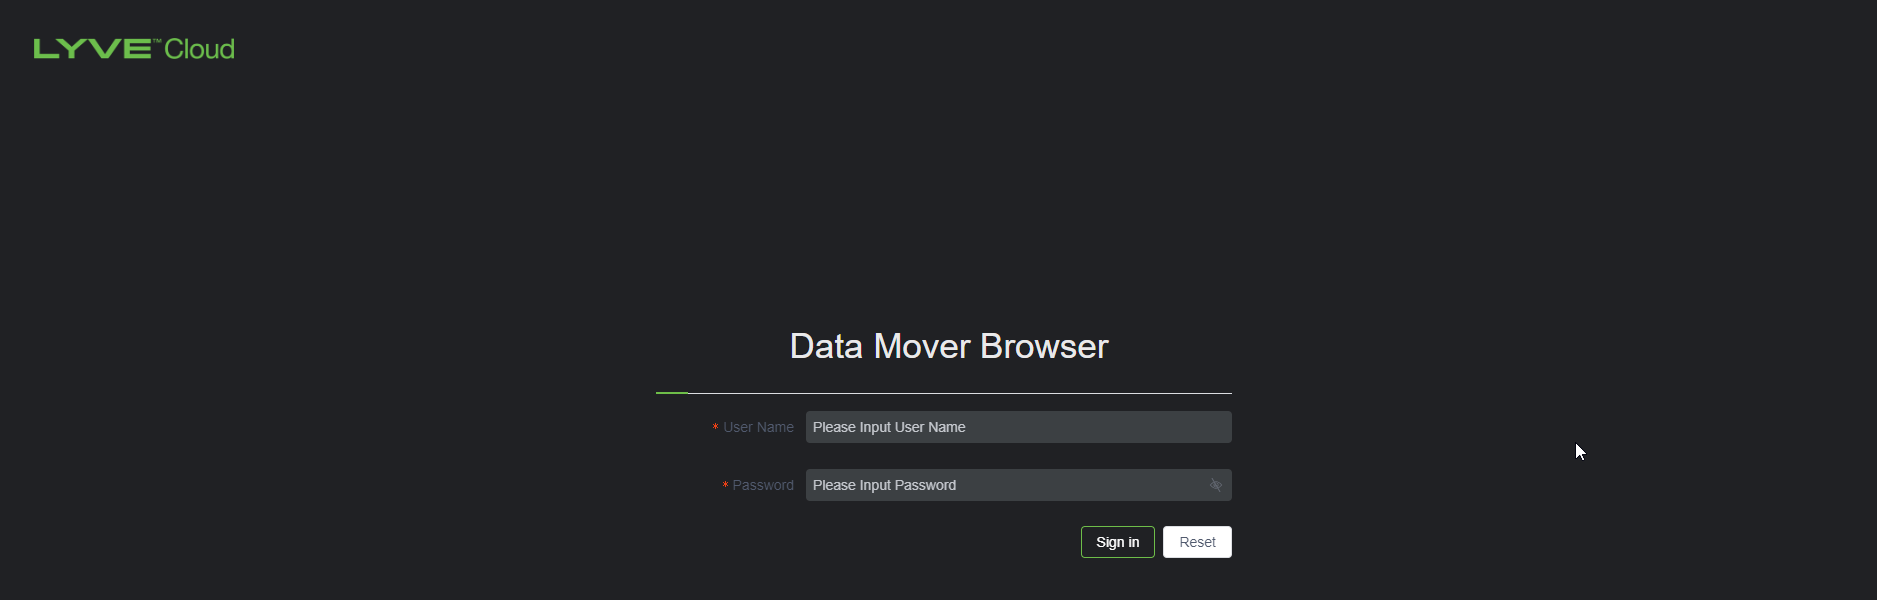 Data_Mover_browser.png